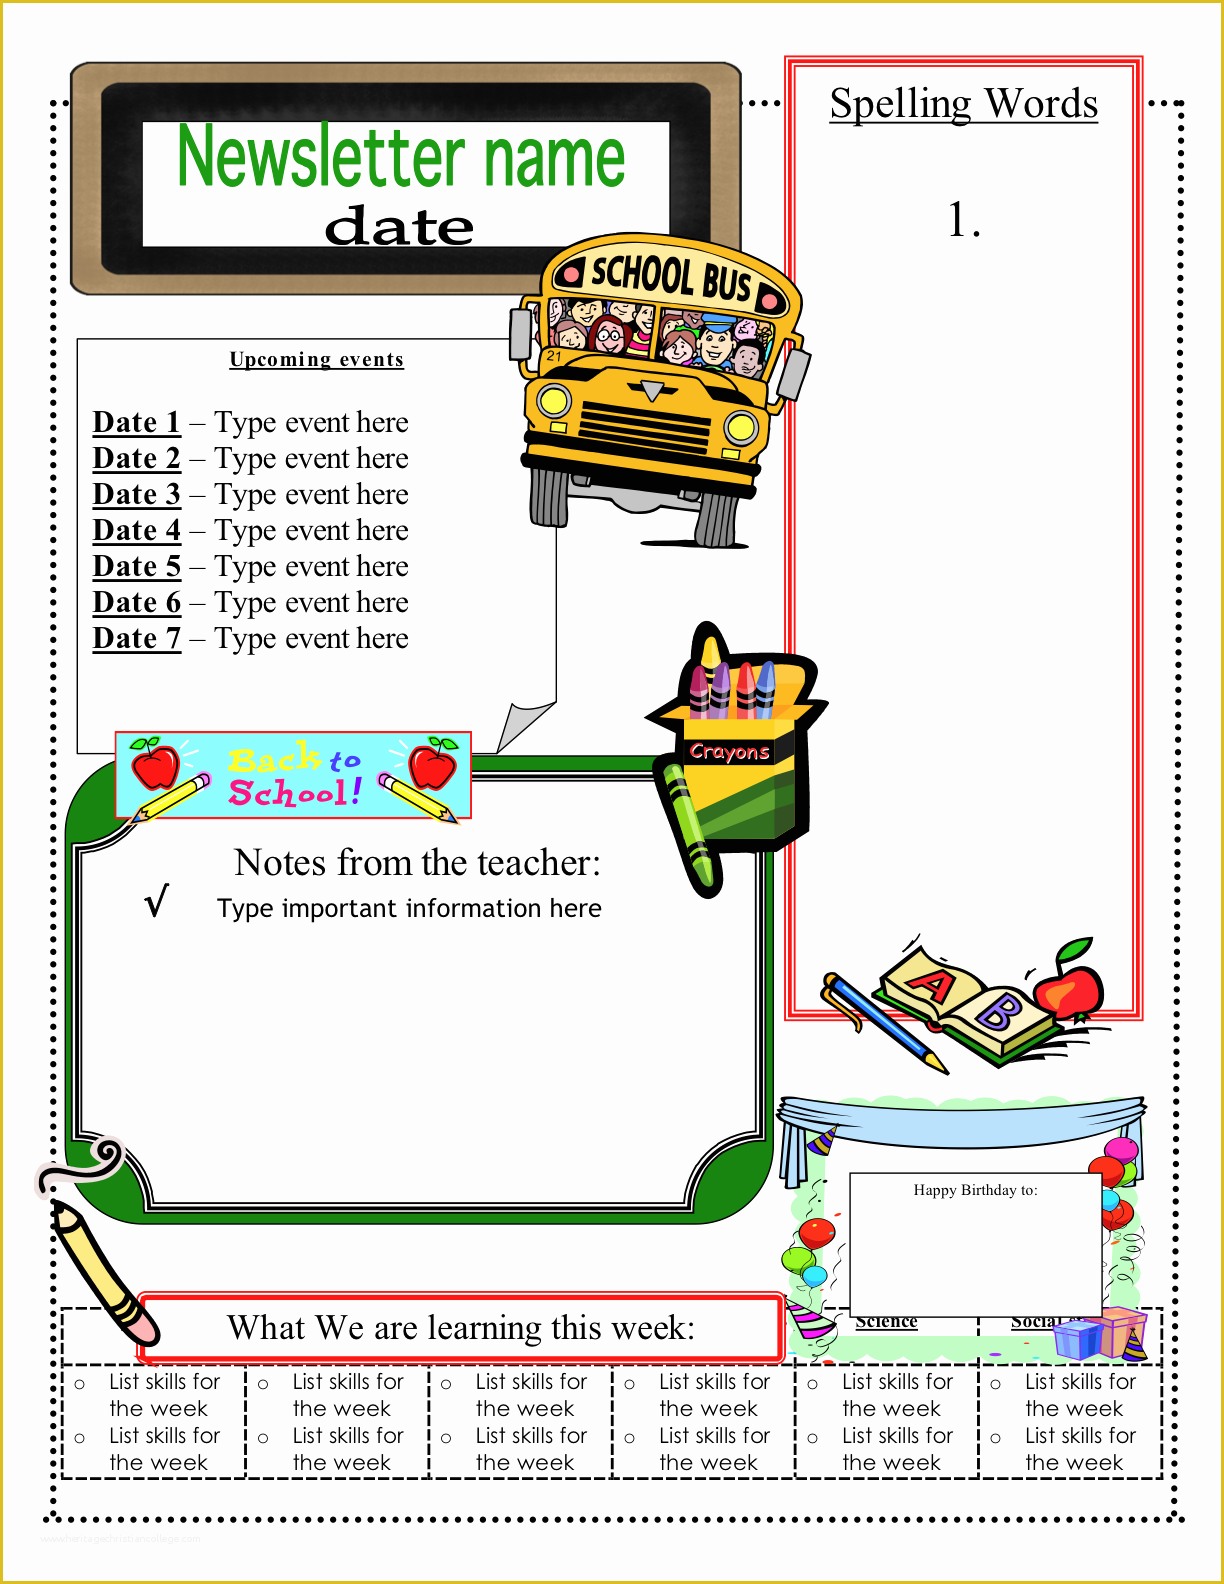 Free Newsletter Templates for Teachers Of Free Classroom Newsletter Templates Check Out these Eight